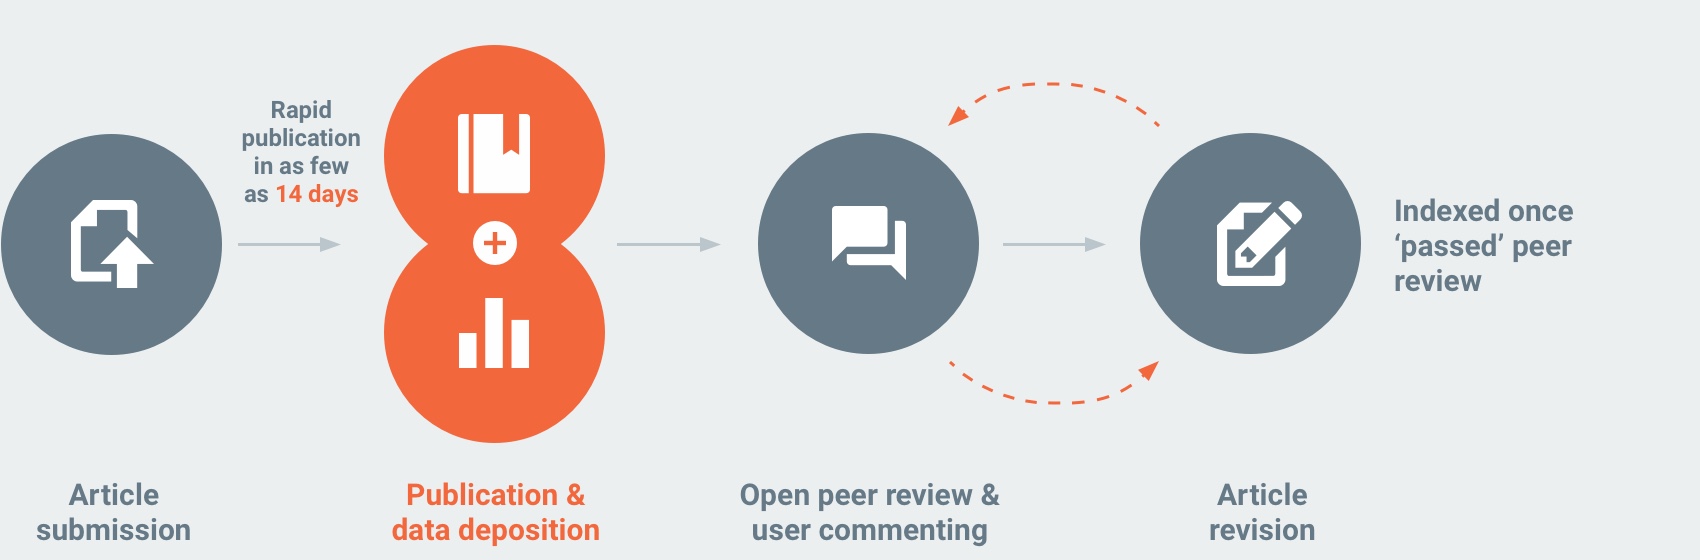 How our publishing process works for articles